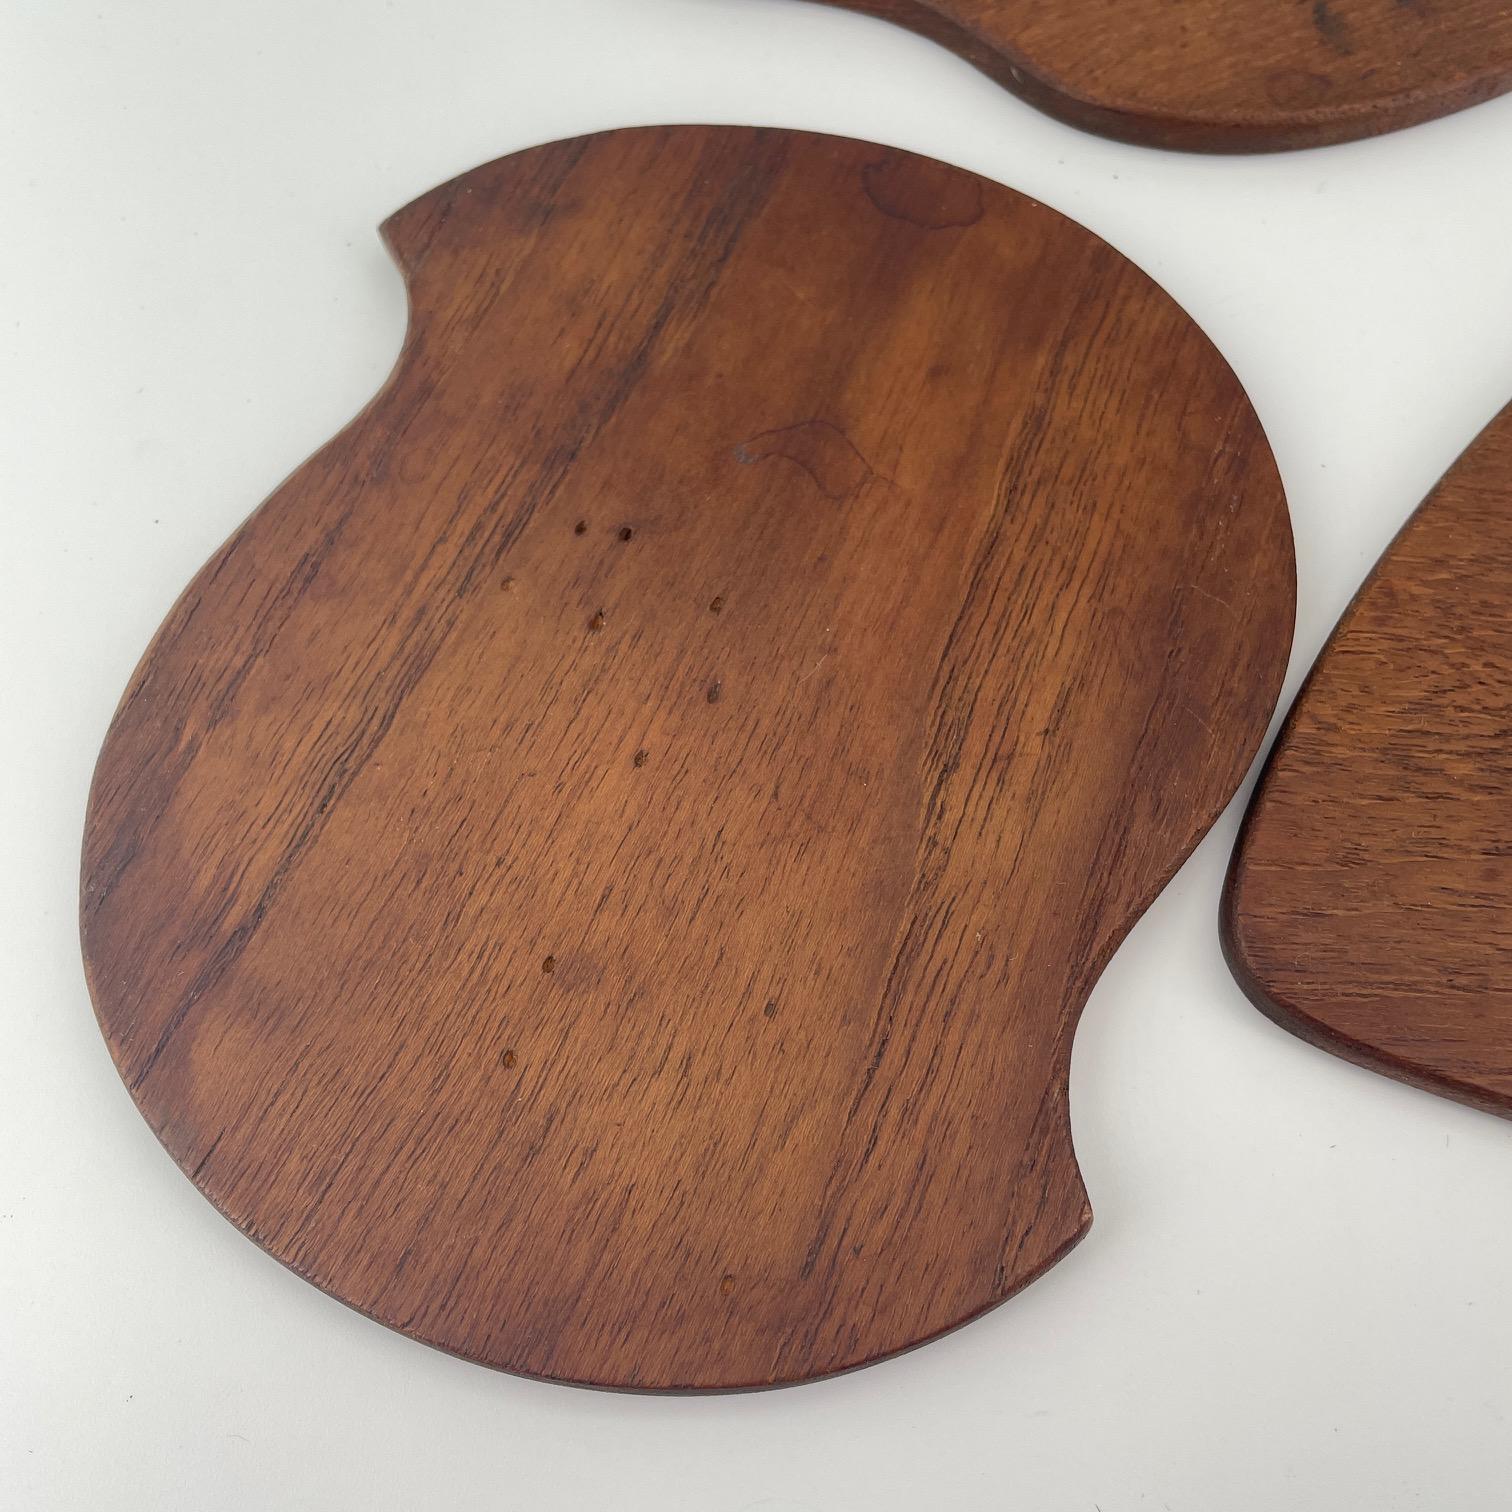 Hand-Crafted 1950s Teak Abstract Organic Cocktail Drink Coasters Woodworker Arp Sculptures